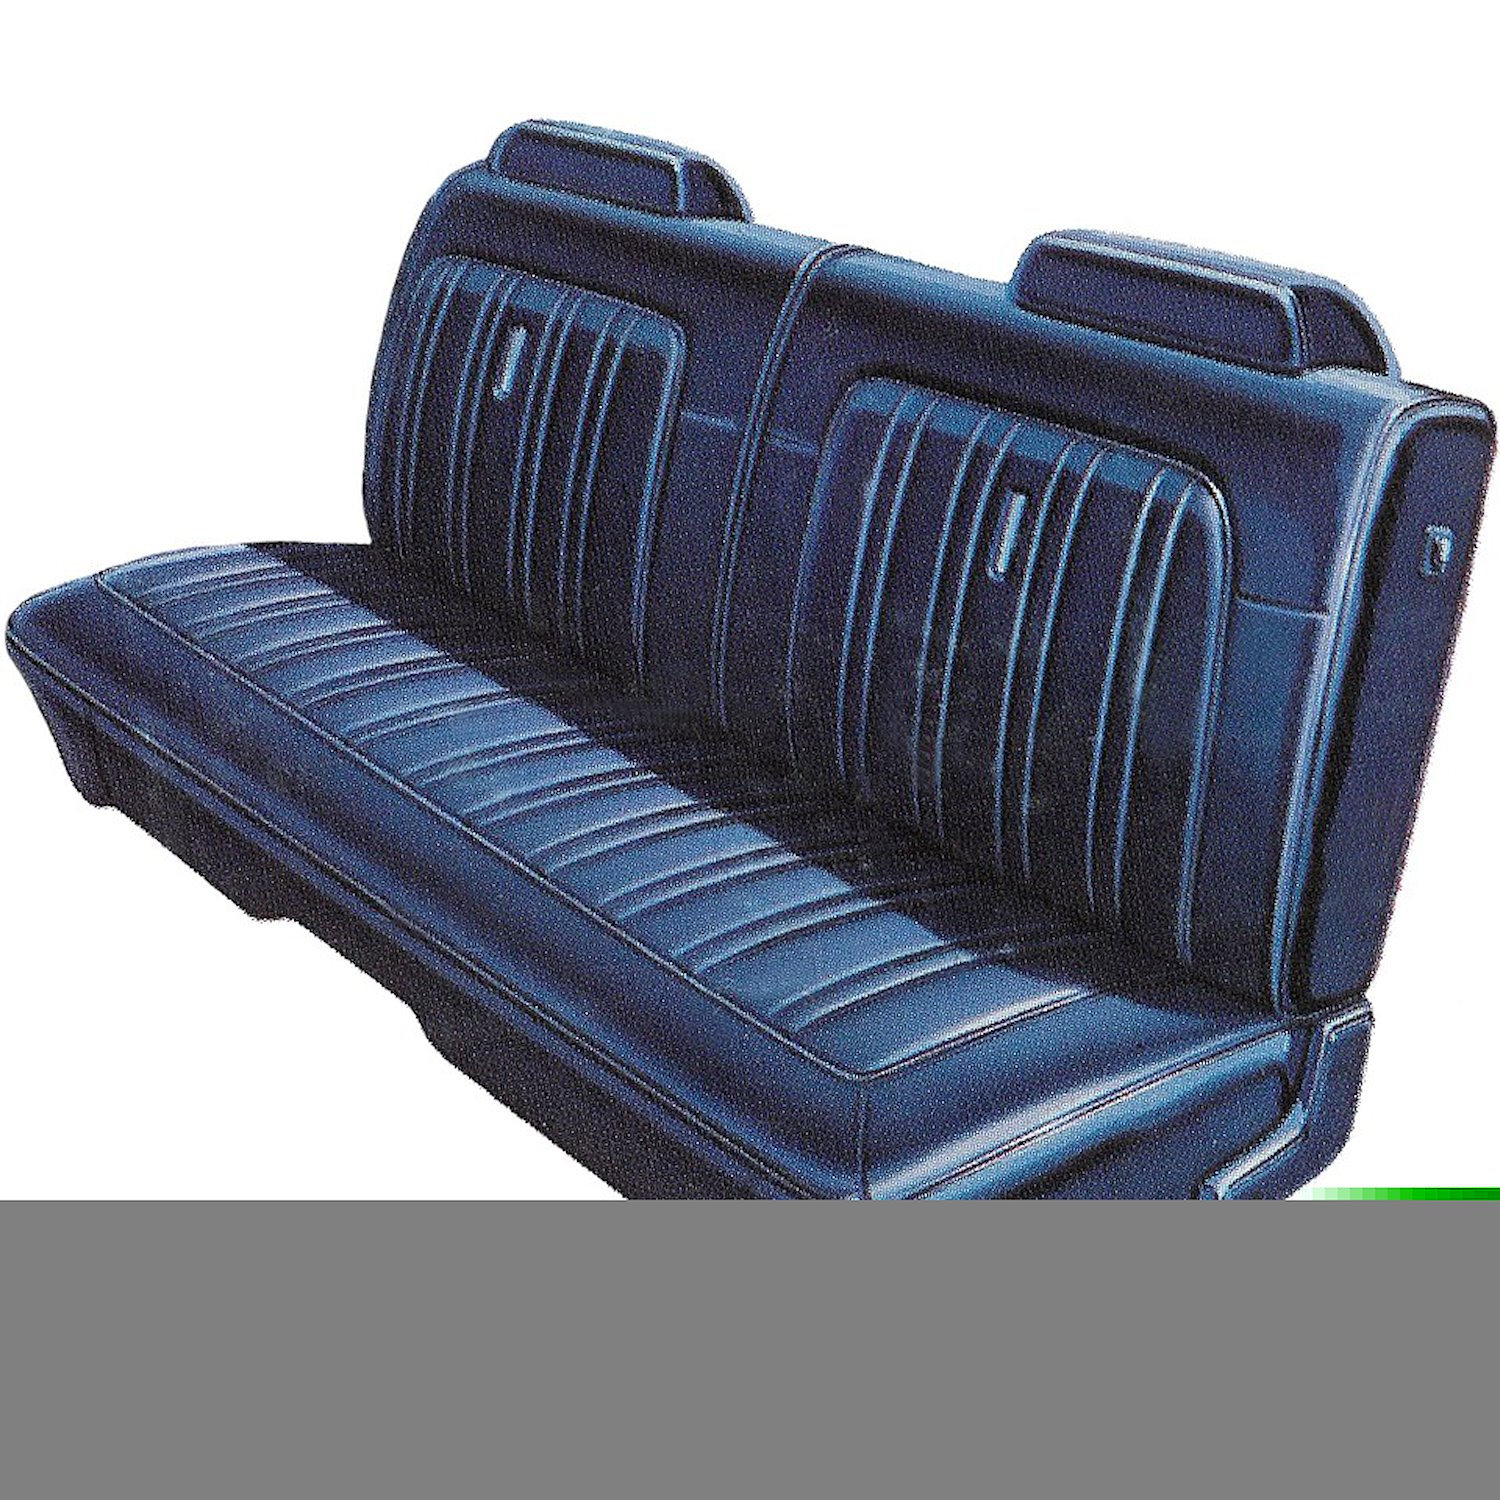 AA74CX00020360 74 CHARGER FRONT SPLIT BENCH - LAGOON BLUE